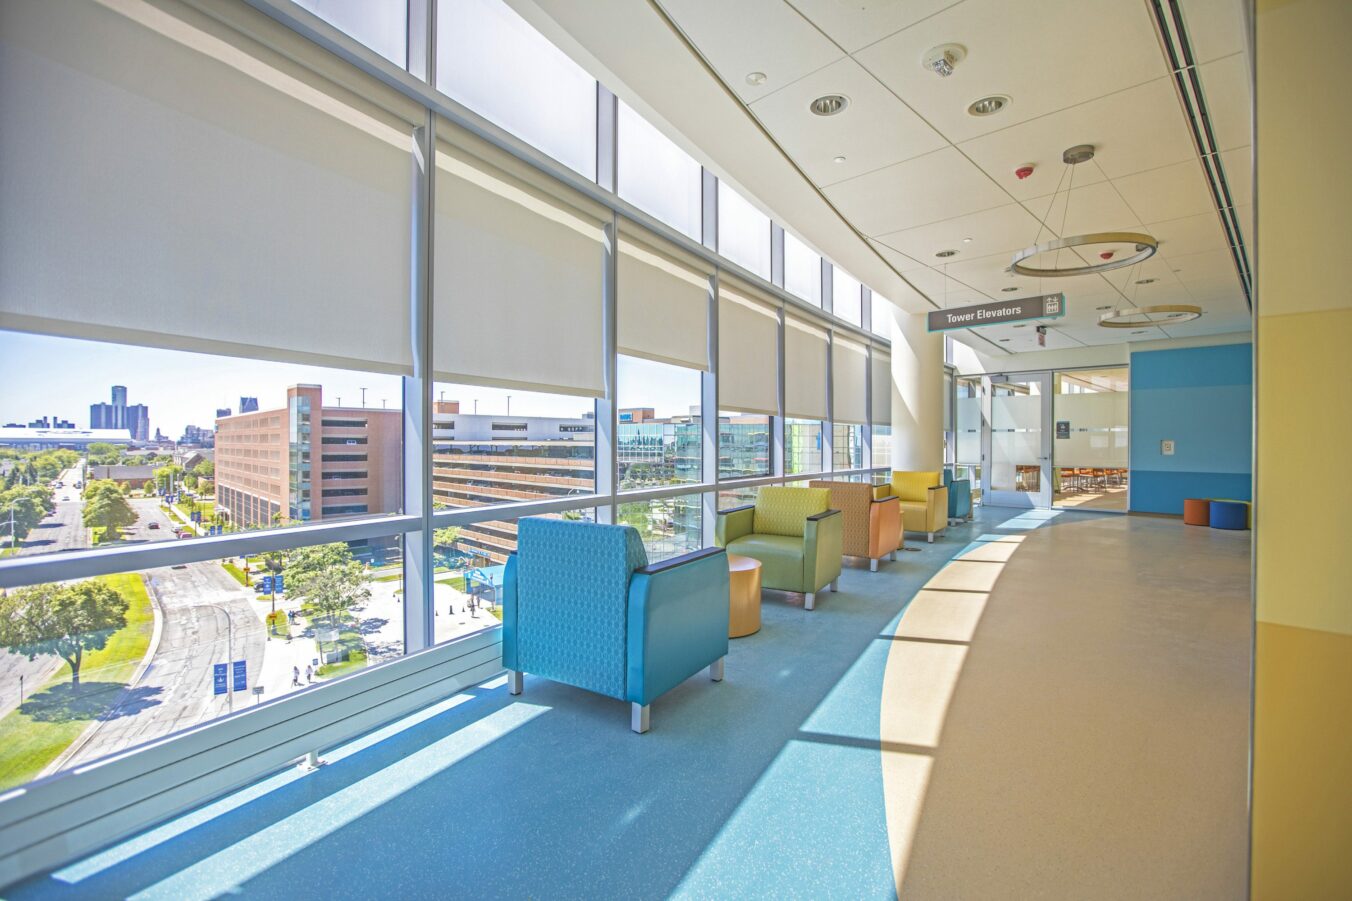 Elevator Bank Area of Children's Hospital. Along sun-filled windows are colorful lounge waiting chairs.